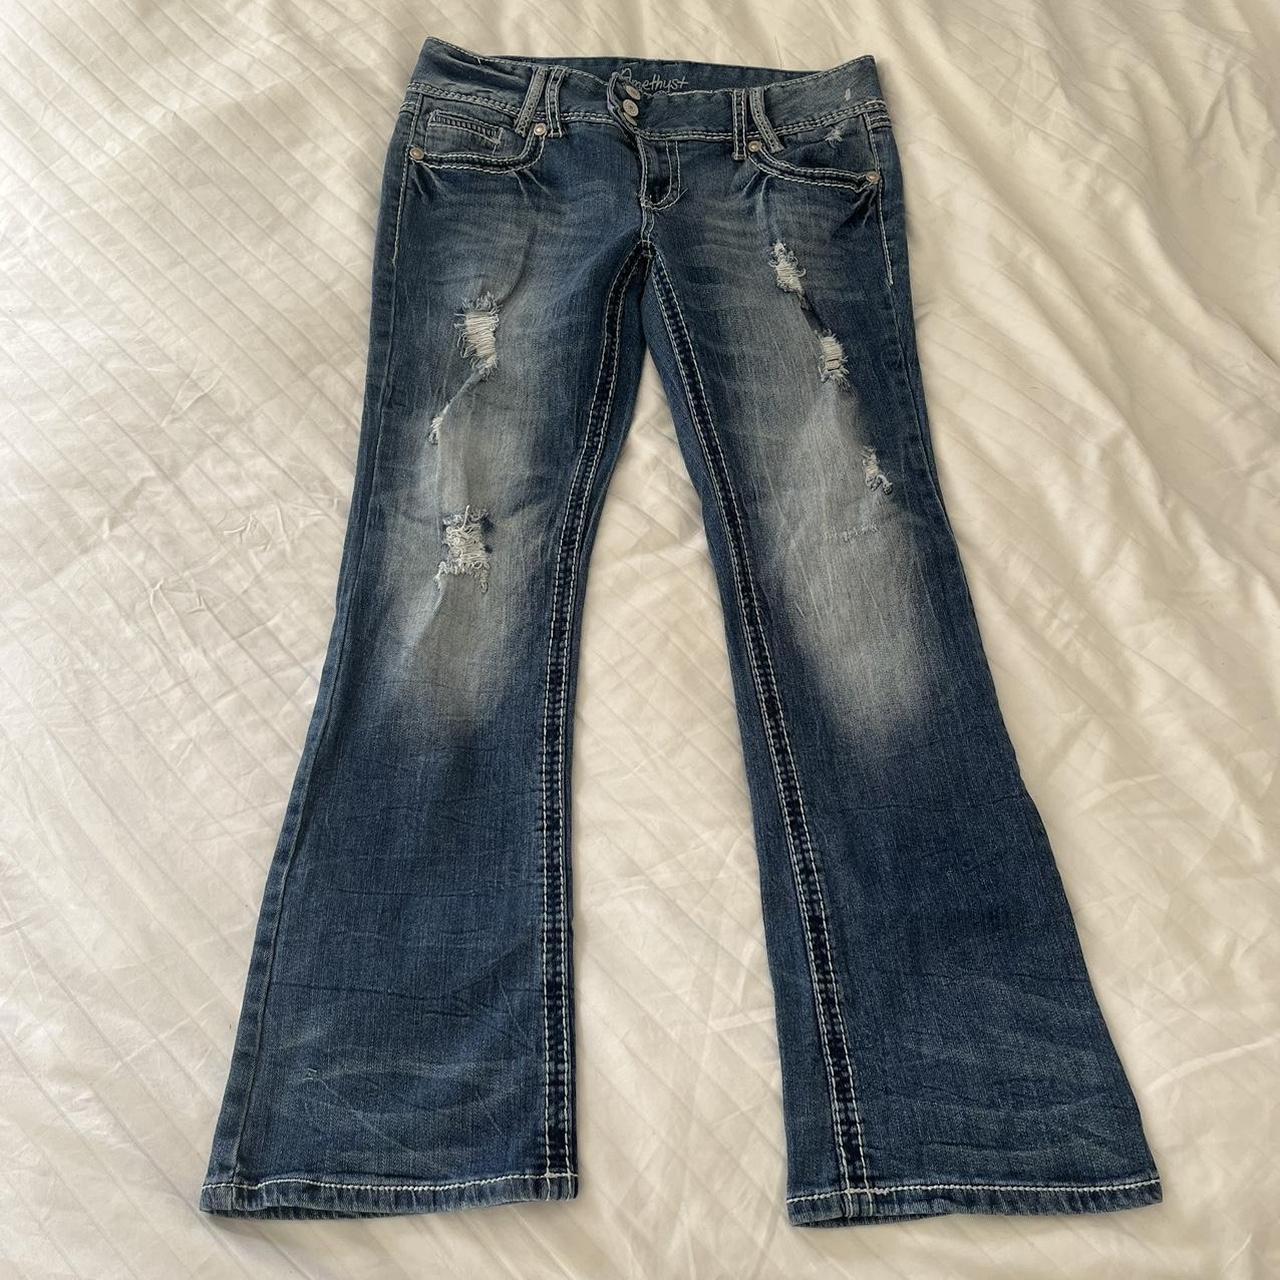 Vintage early 2000s flare jeans W32 L29 Shown on a... - Depop